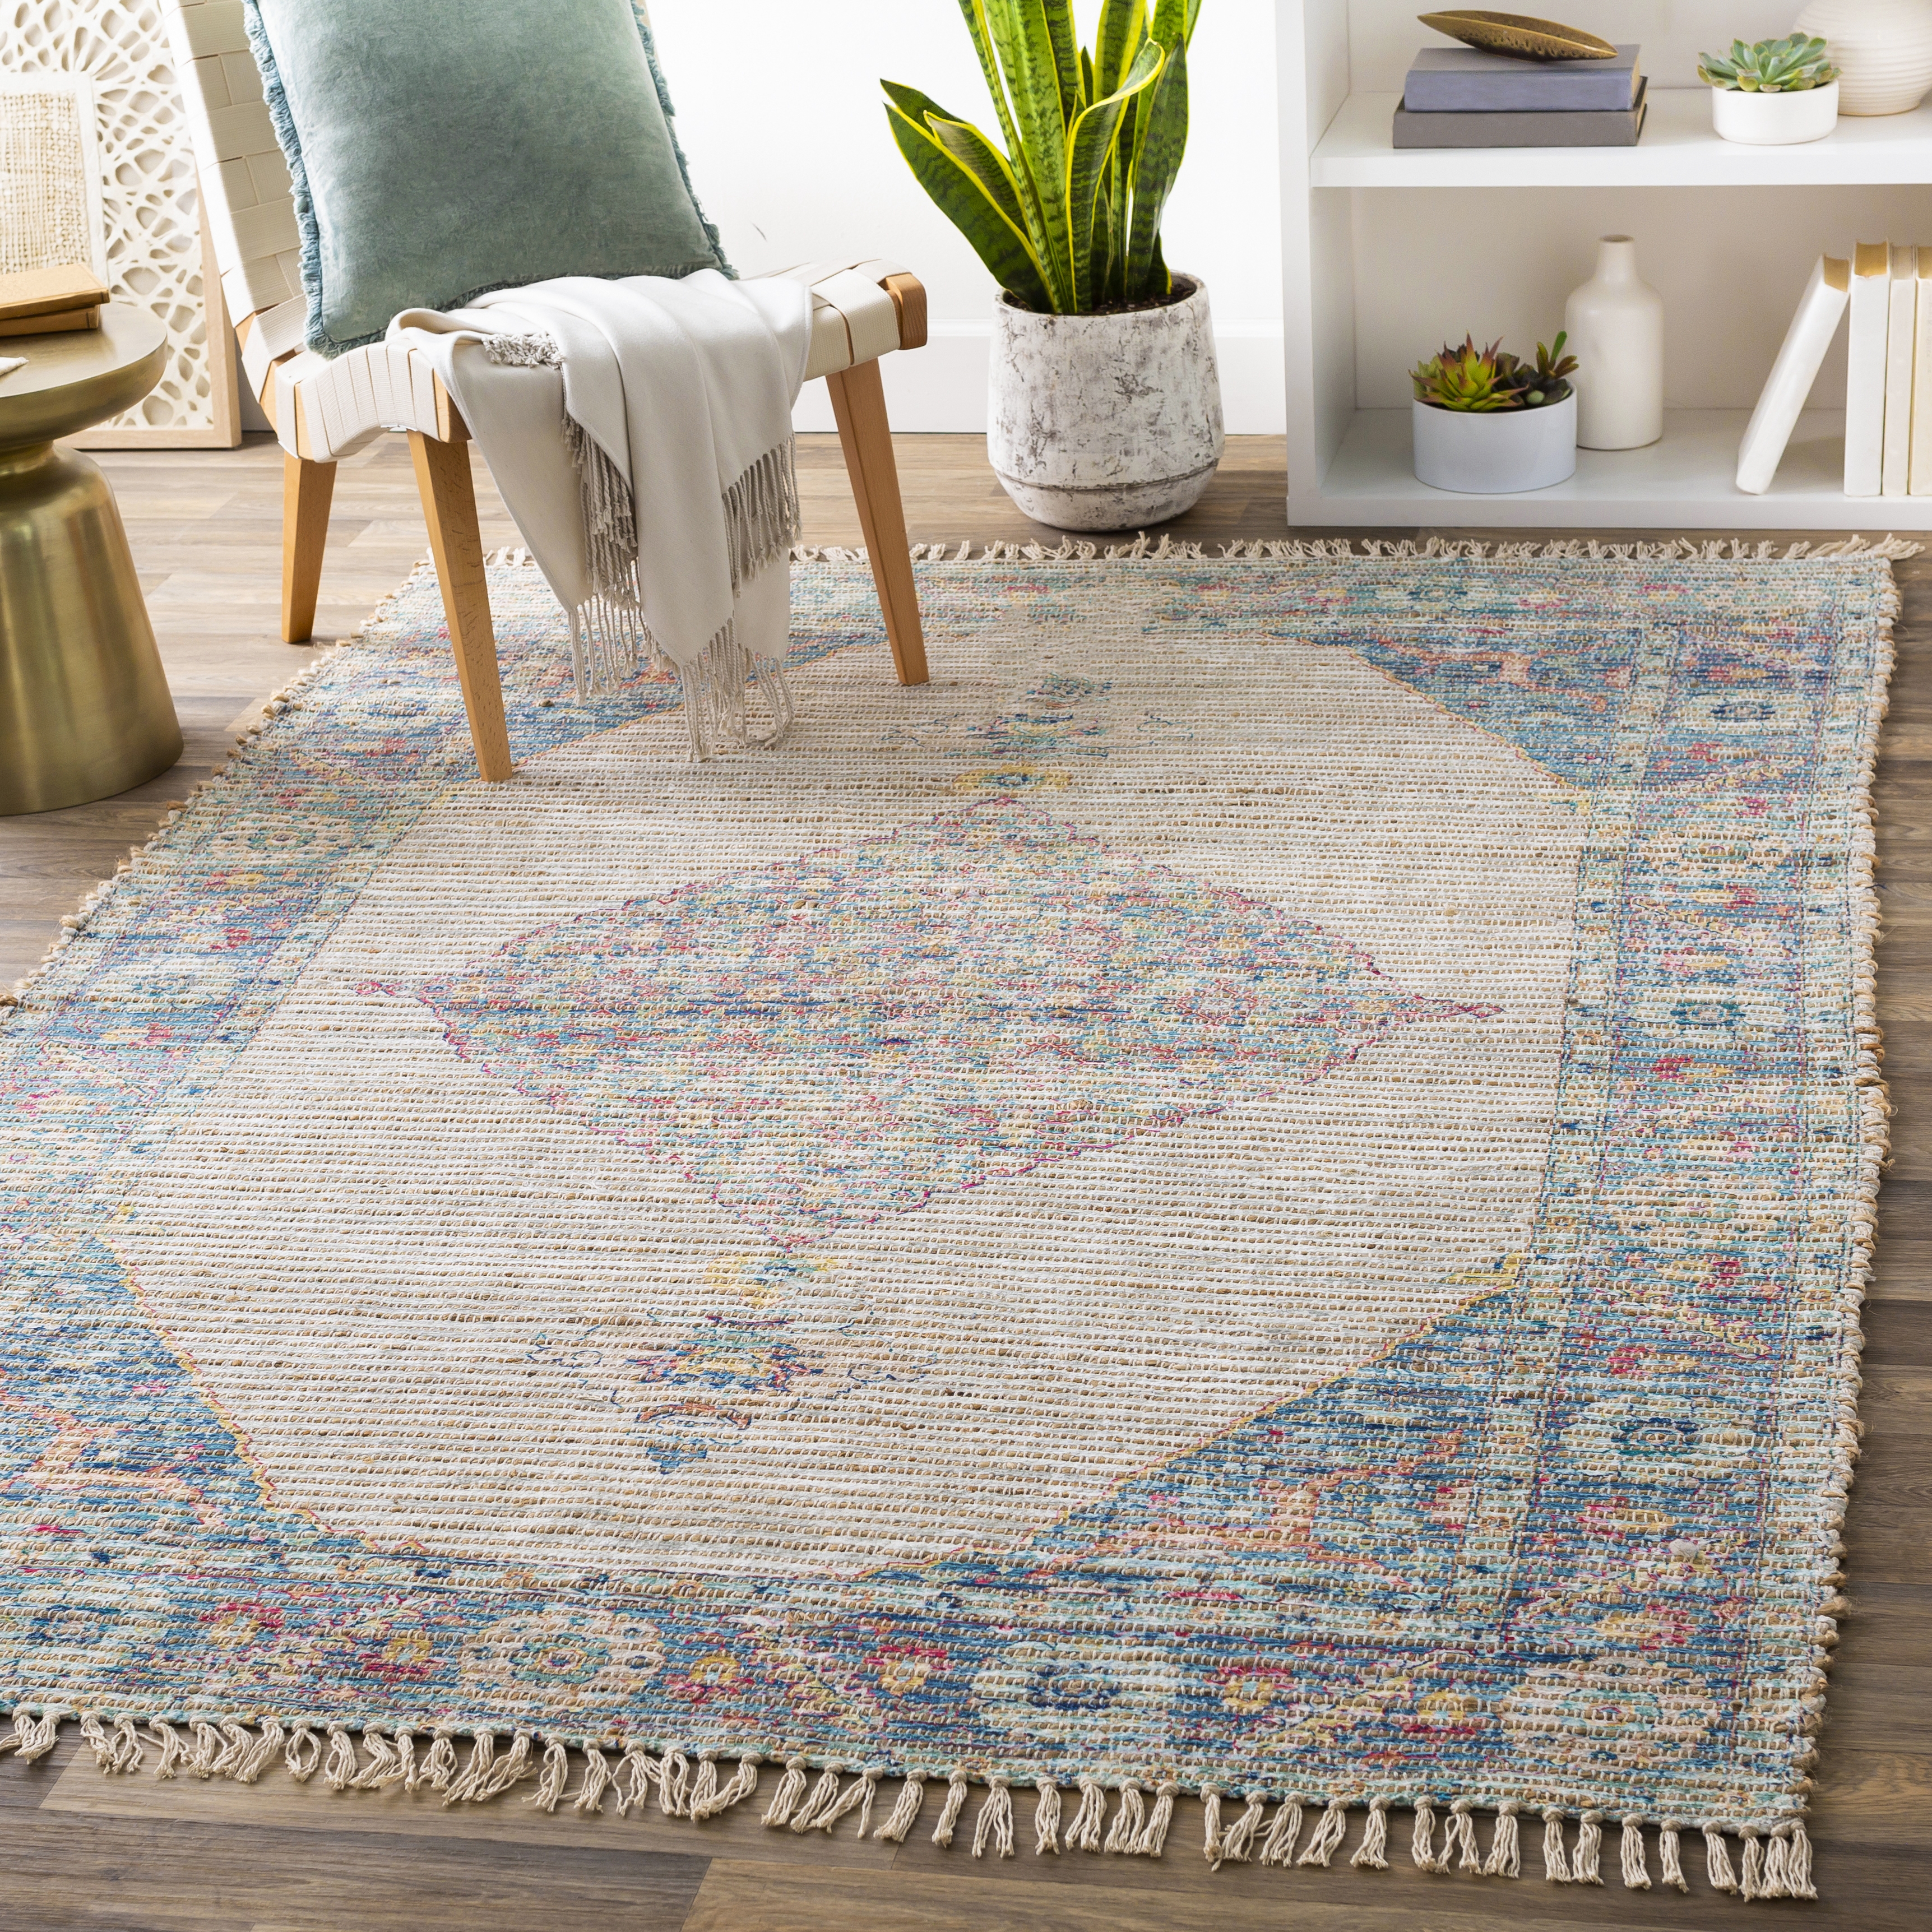 Coventry Rug, 2' x 3' - Image 1